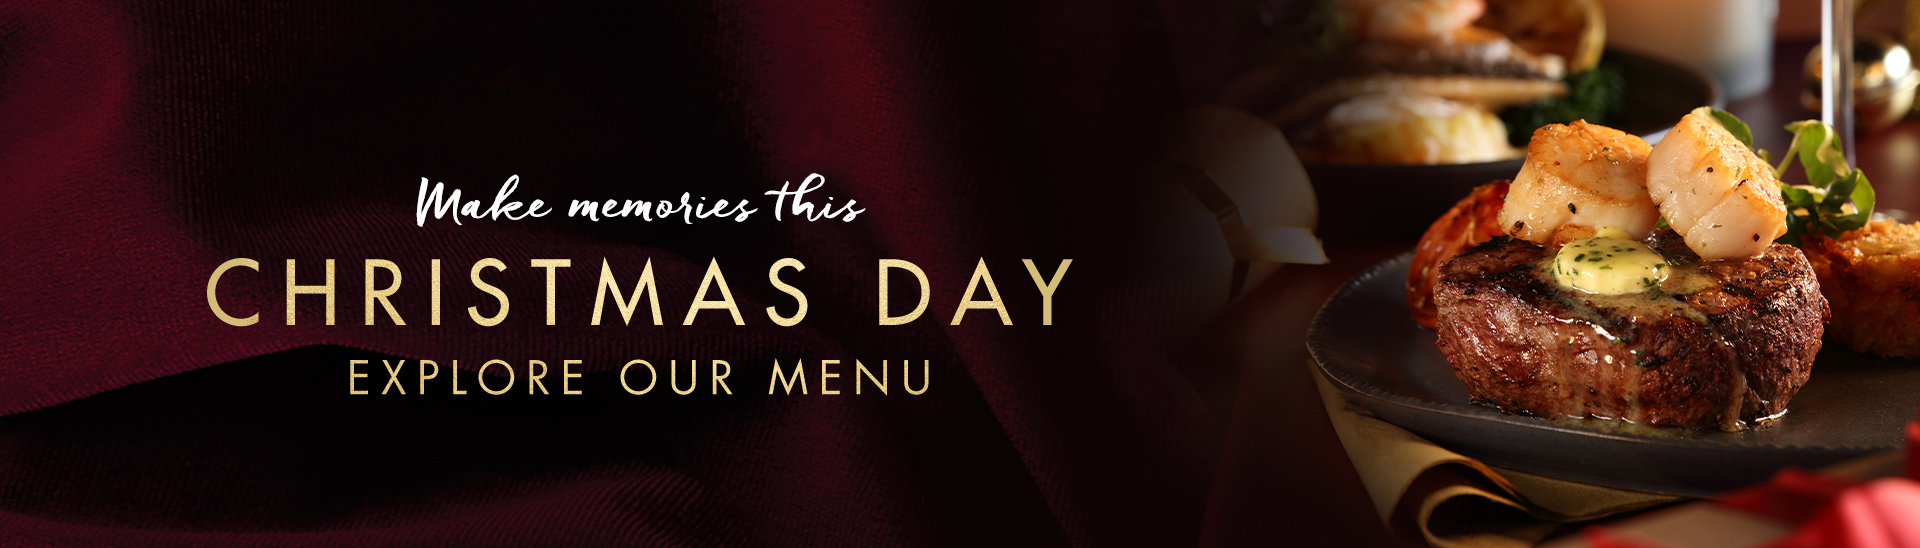 Christmas Day menu at Miller & Carter Muswell Hill